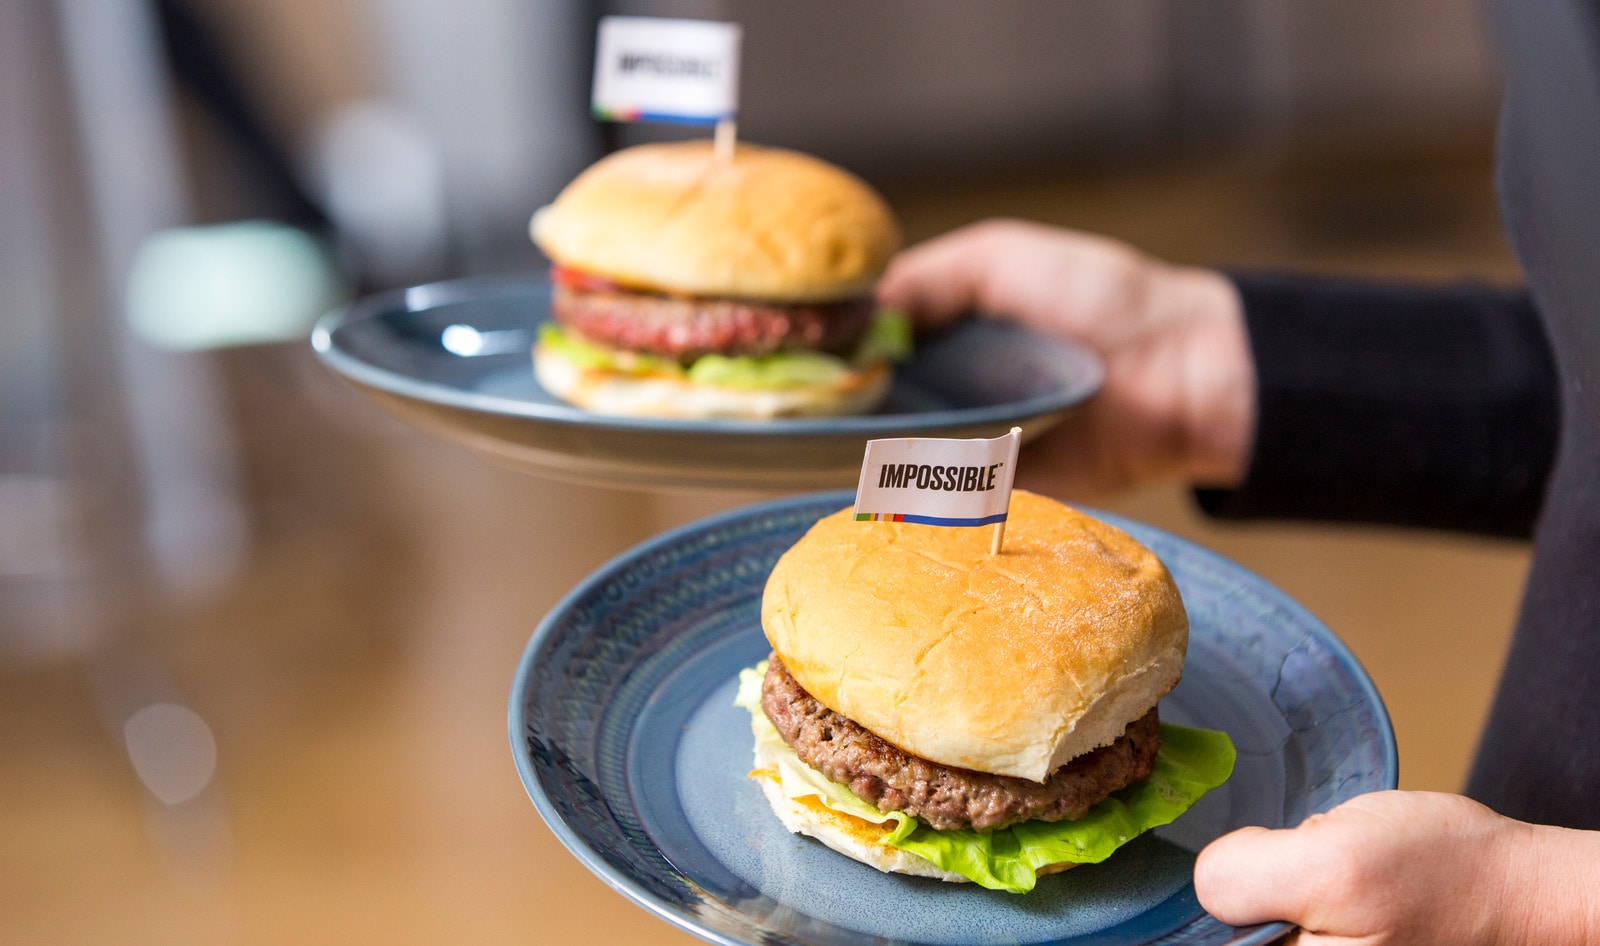 Impossible Burger 2.0 Wins Top Prize at World’s Biggest Technology Conference